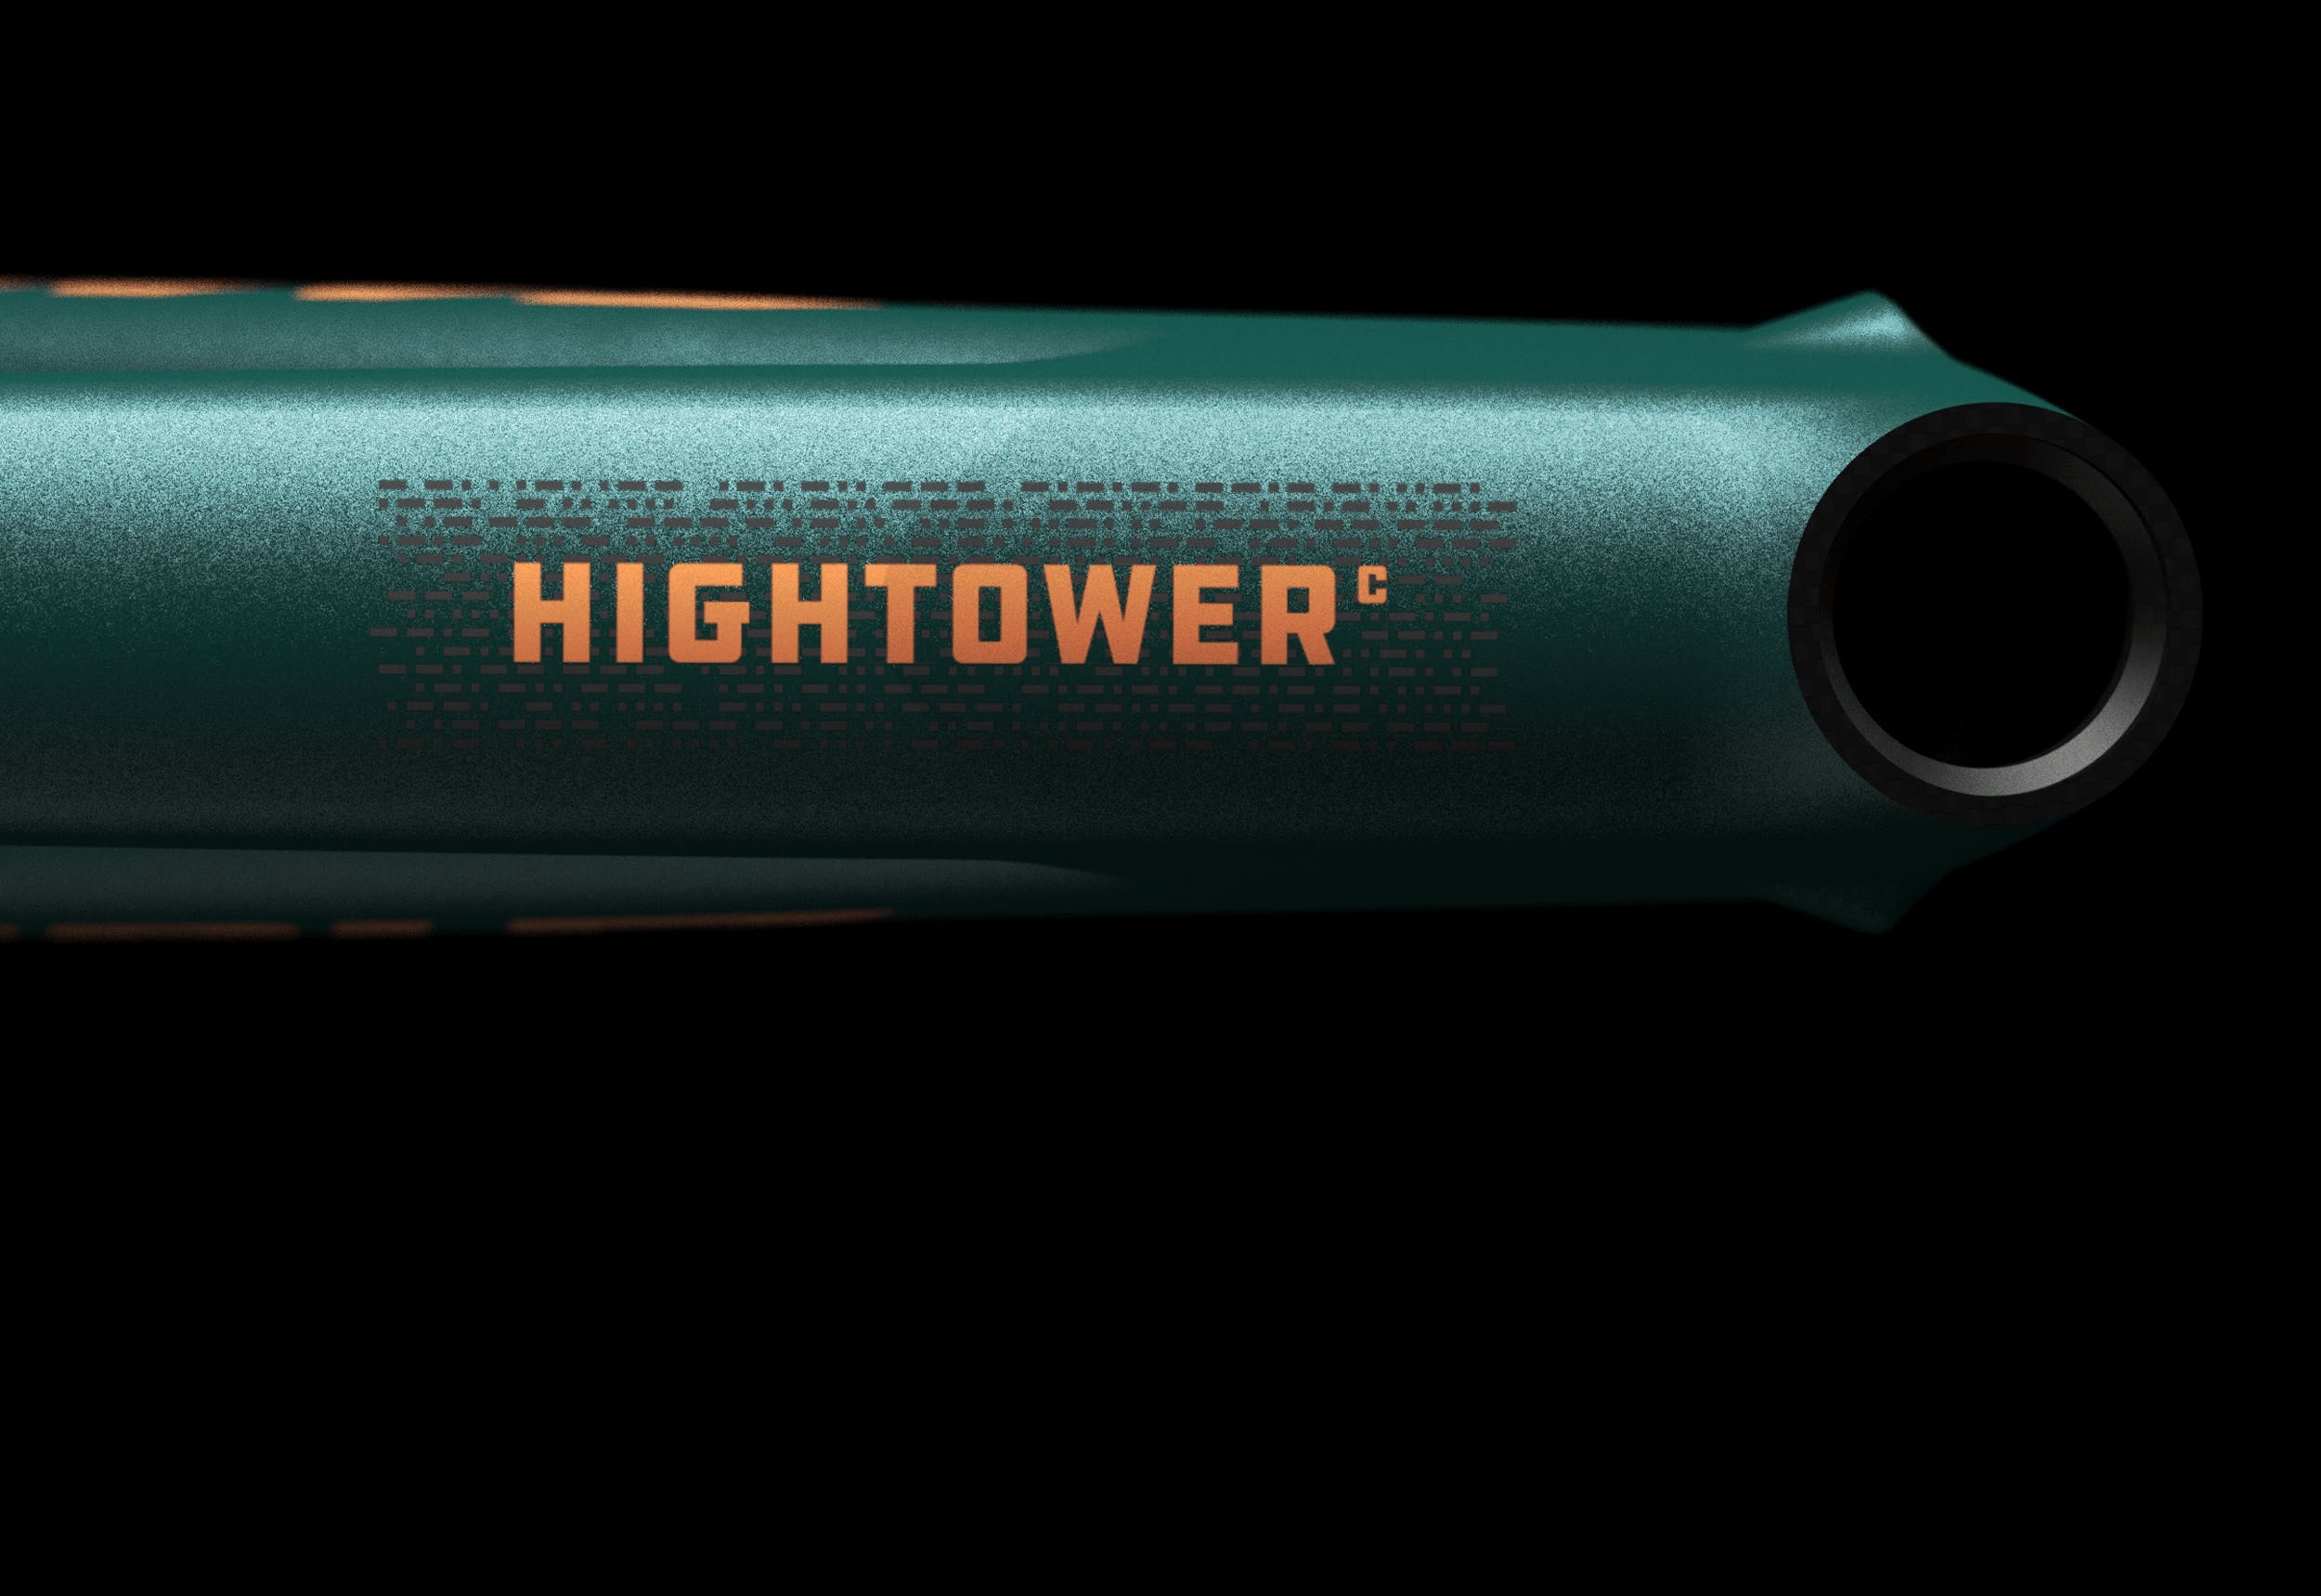 Santa Cruz Hightower 3 front triangle with the top tube decal visible